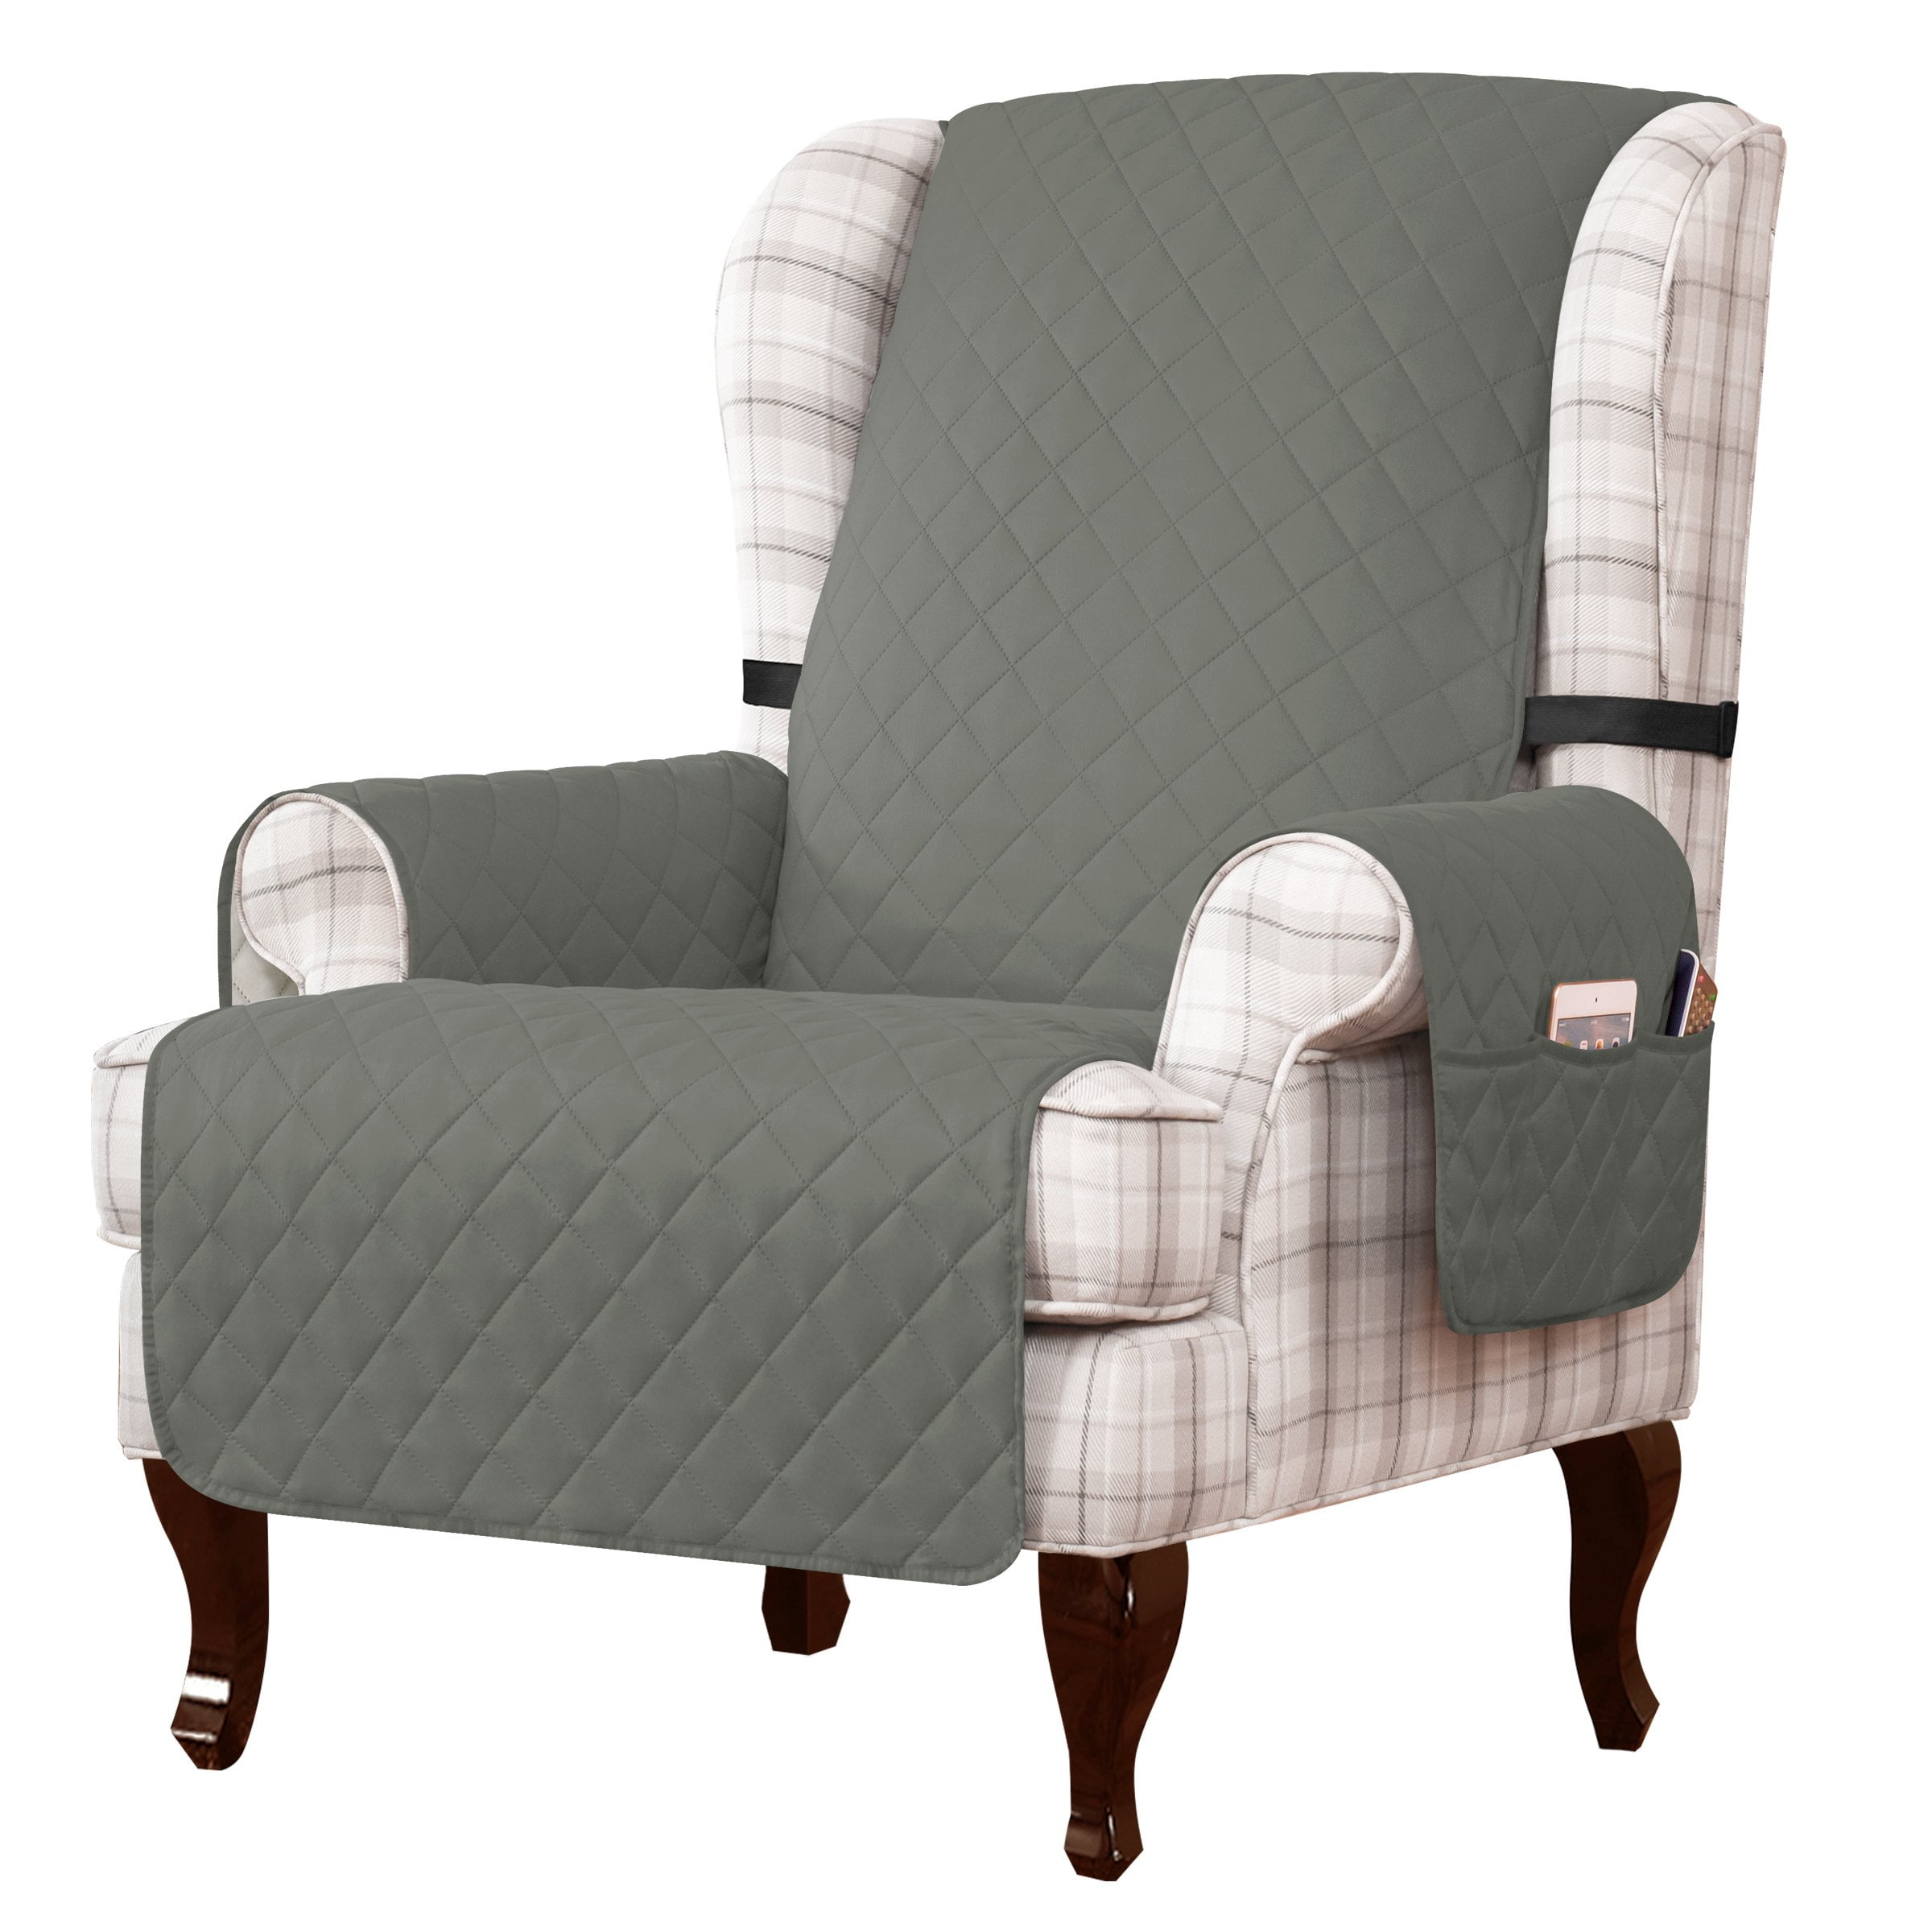 Reversible Quilted Chair Cover with Plaid Patchwork Pattern 